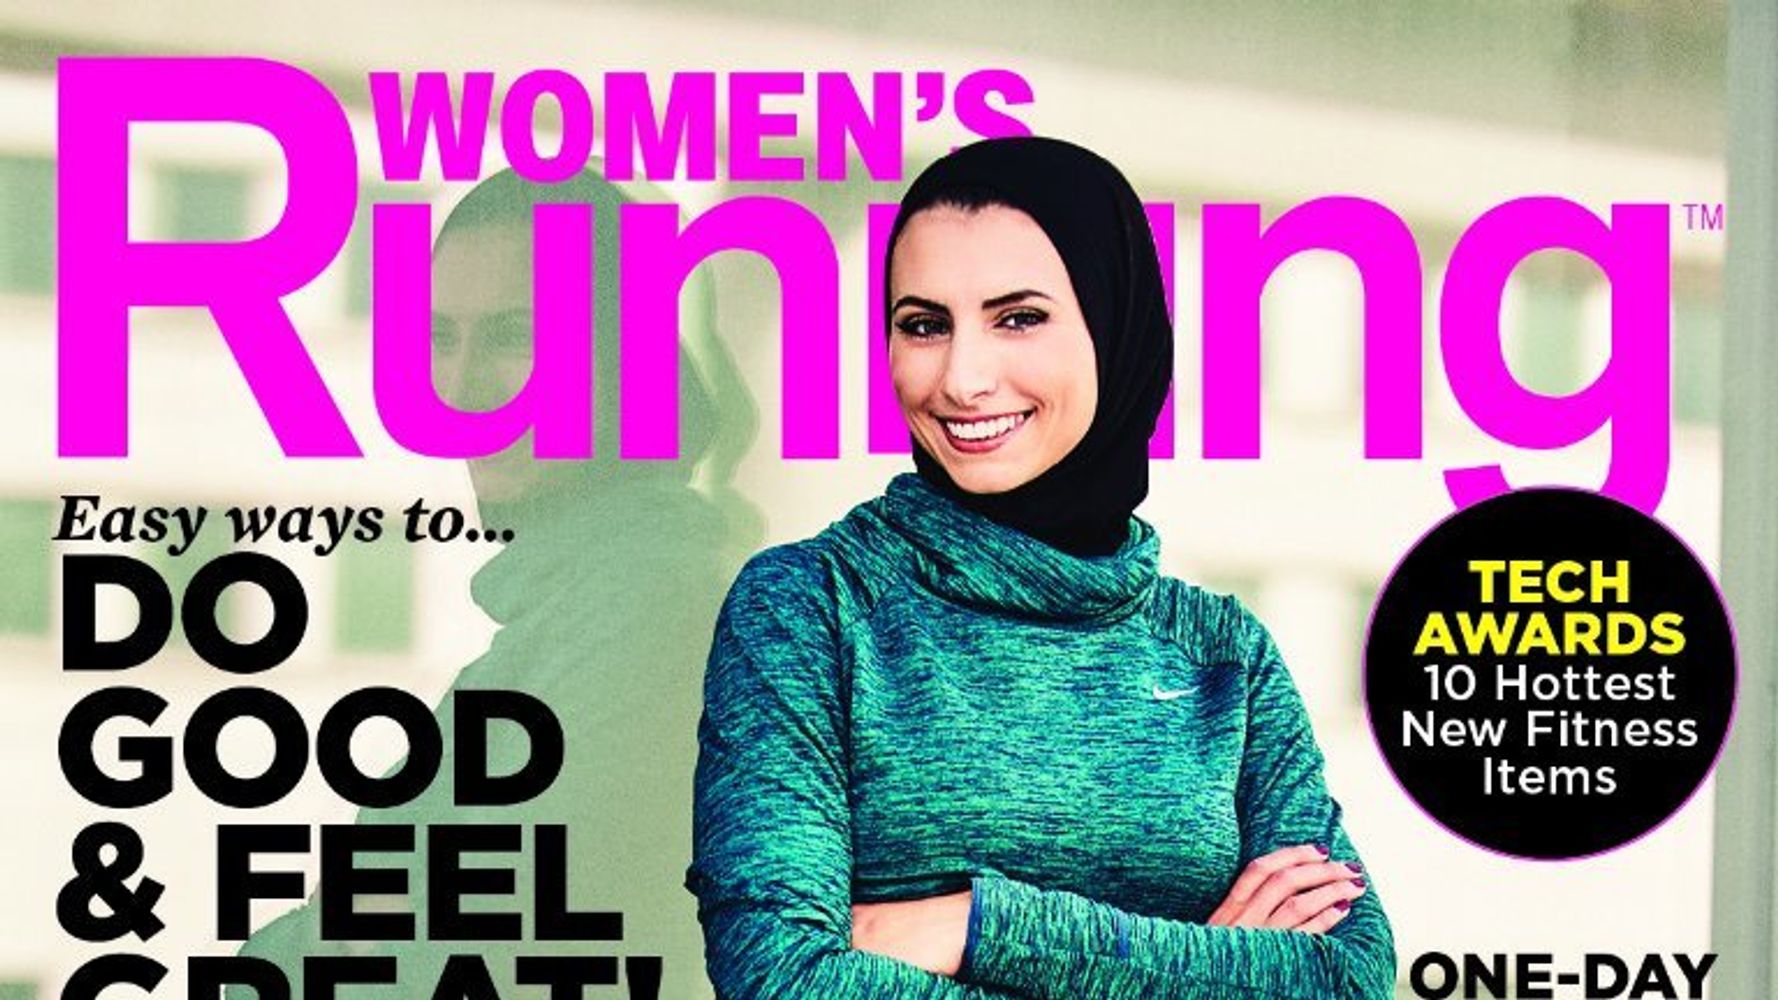 Women’s running magazine features woman in hijab on cover for the first time